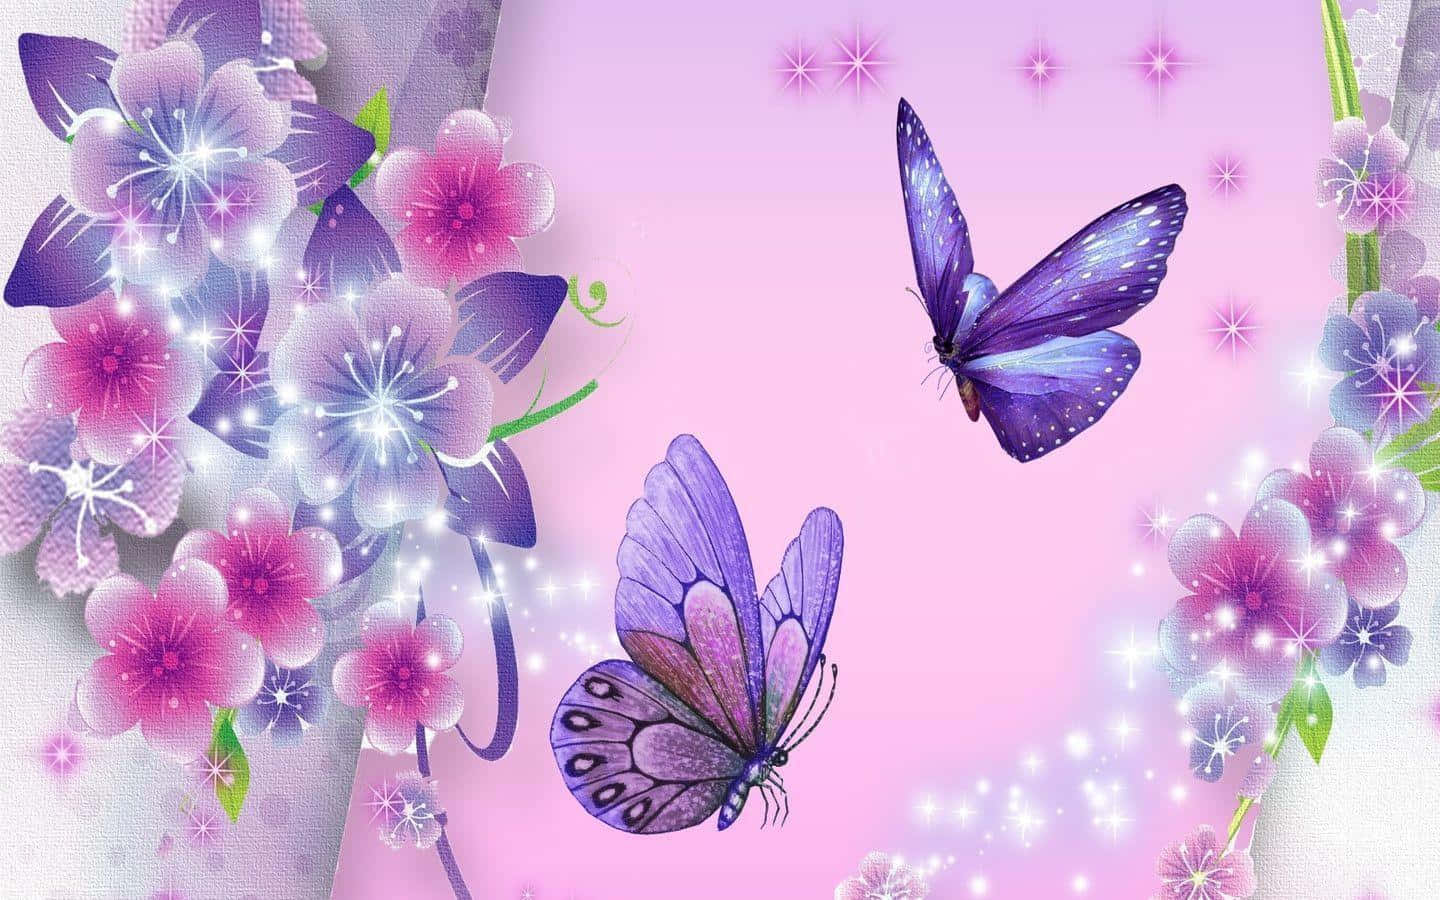 A beautiful butterfly flaps its wings against a vibrant blue sky Wallpaper